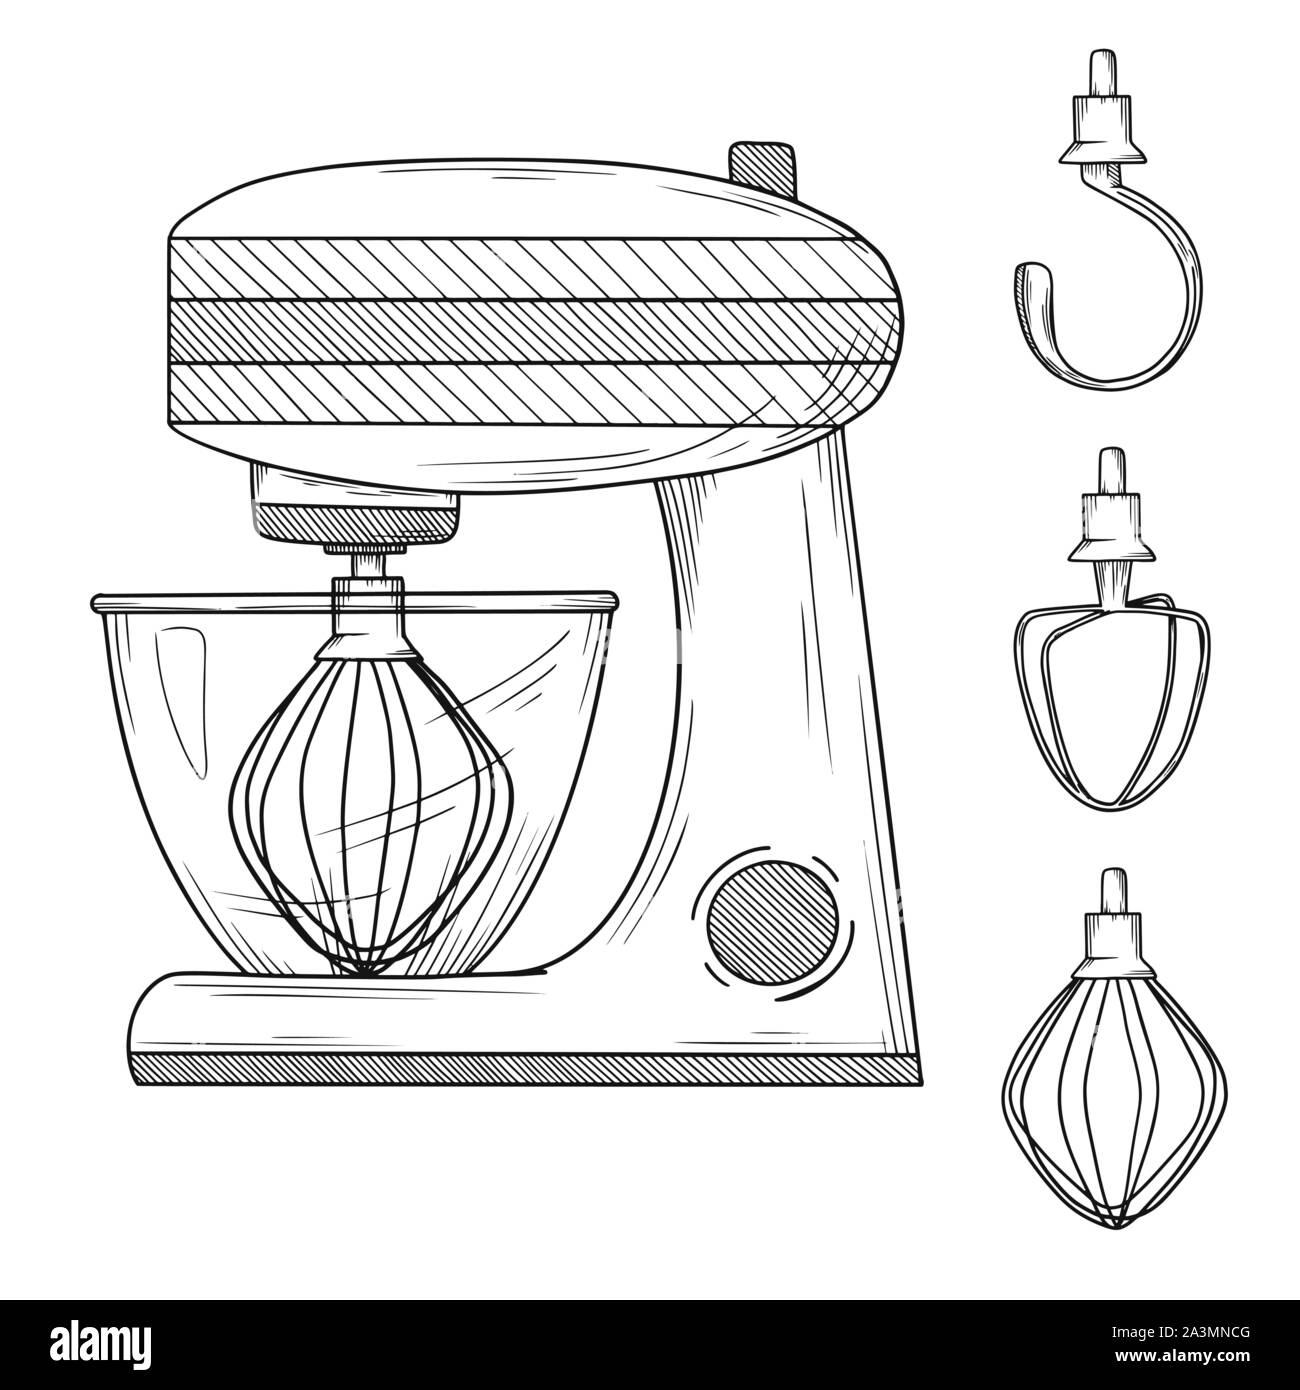 How to draw a kitchen mixer - YouTube